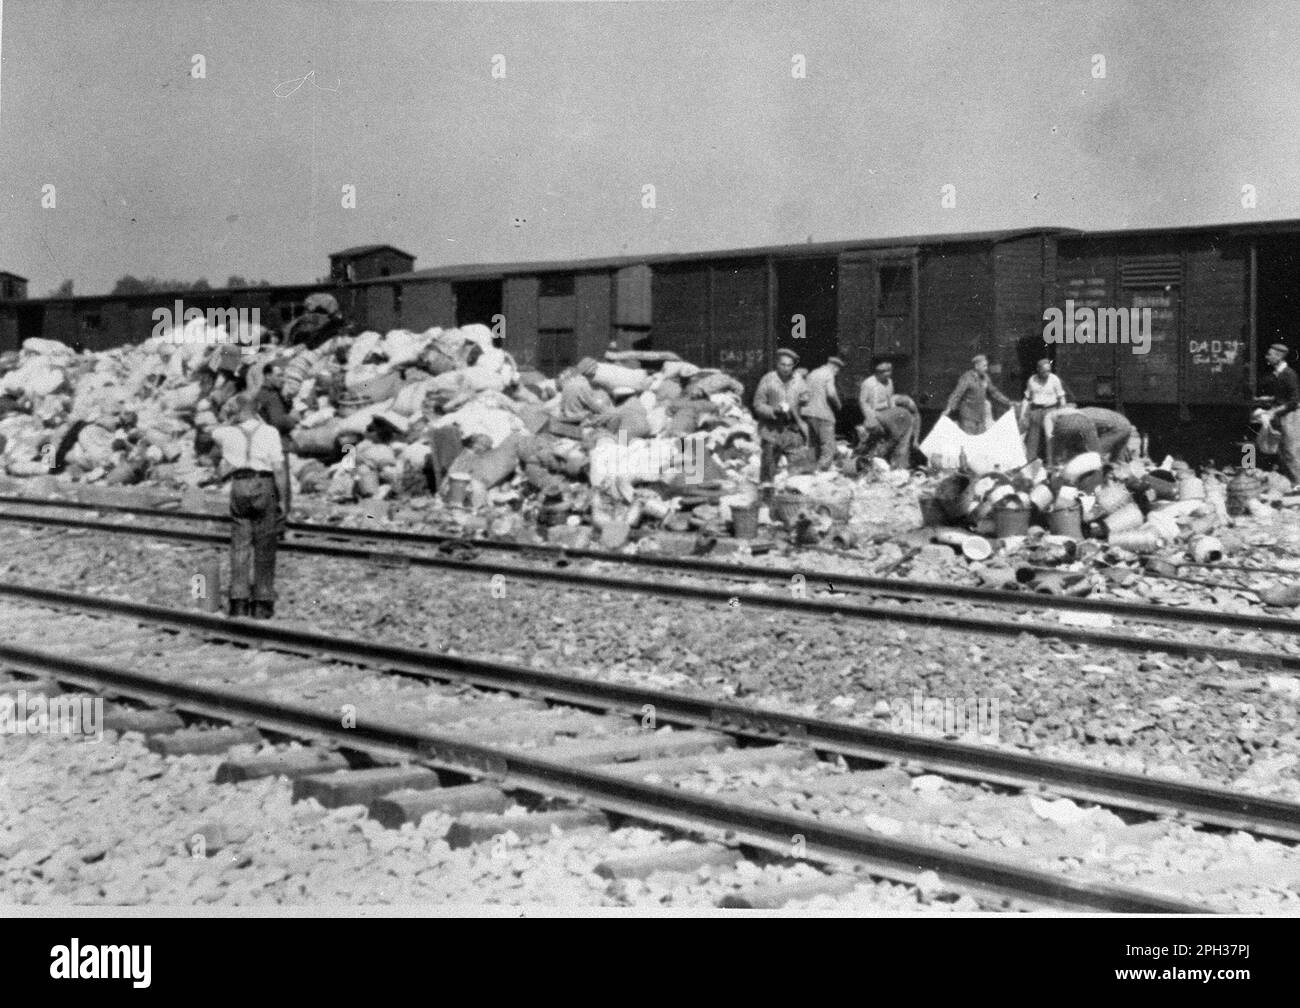 The 'Kanada' barracks in the Auschwitz concentration camp, German-occupied Poland, during the Holocaust. Prisoners sort through the cases and bags of those who were sent to the gas chamber on arrival. The warehouses were named 'Kanada' because they contained the looted belongings of prisoners and were regarded within the camp as the land of plenty. Stock Photo